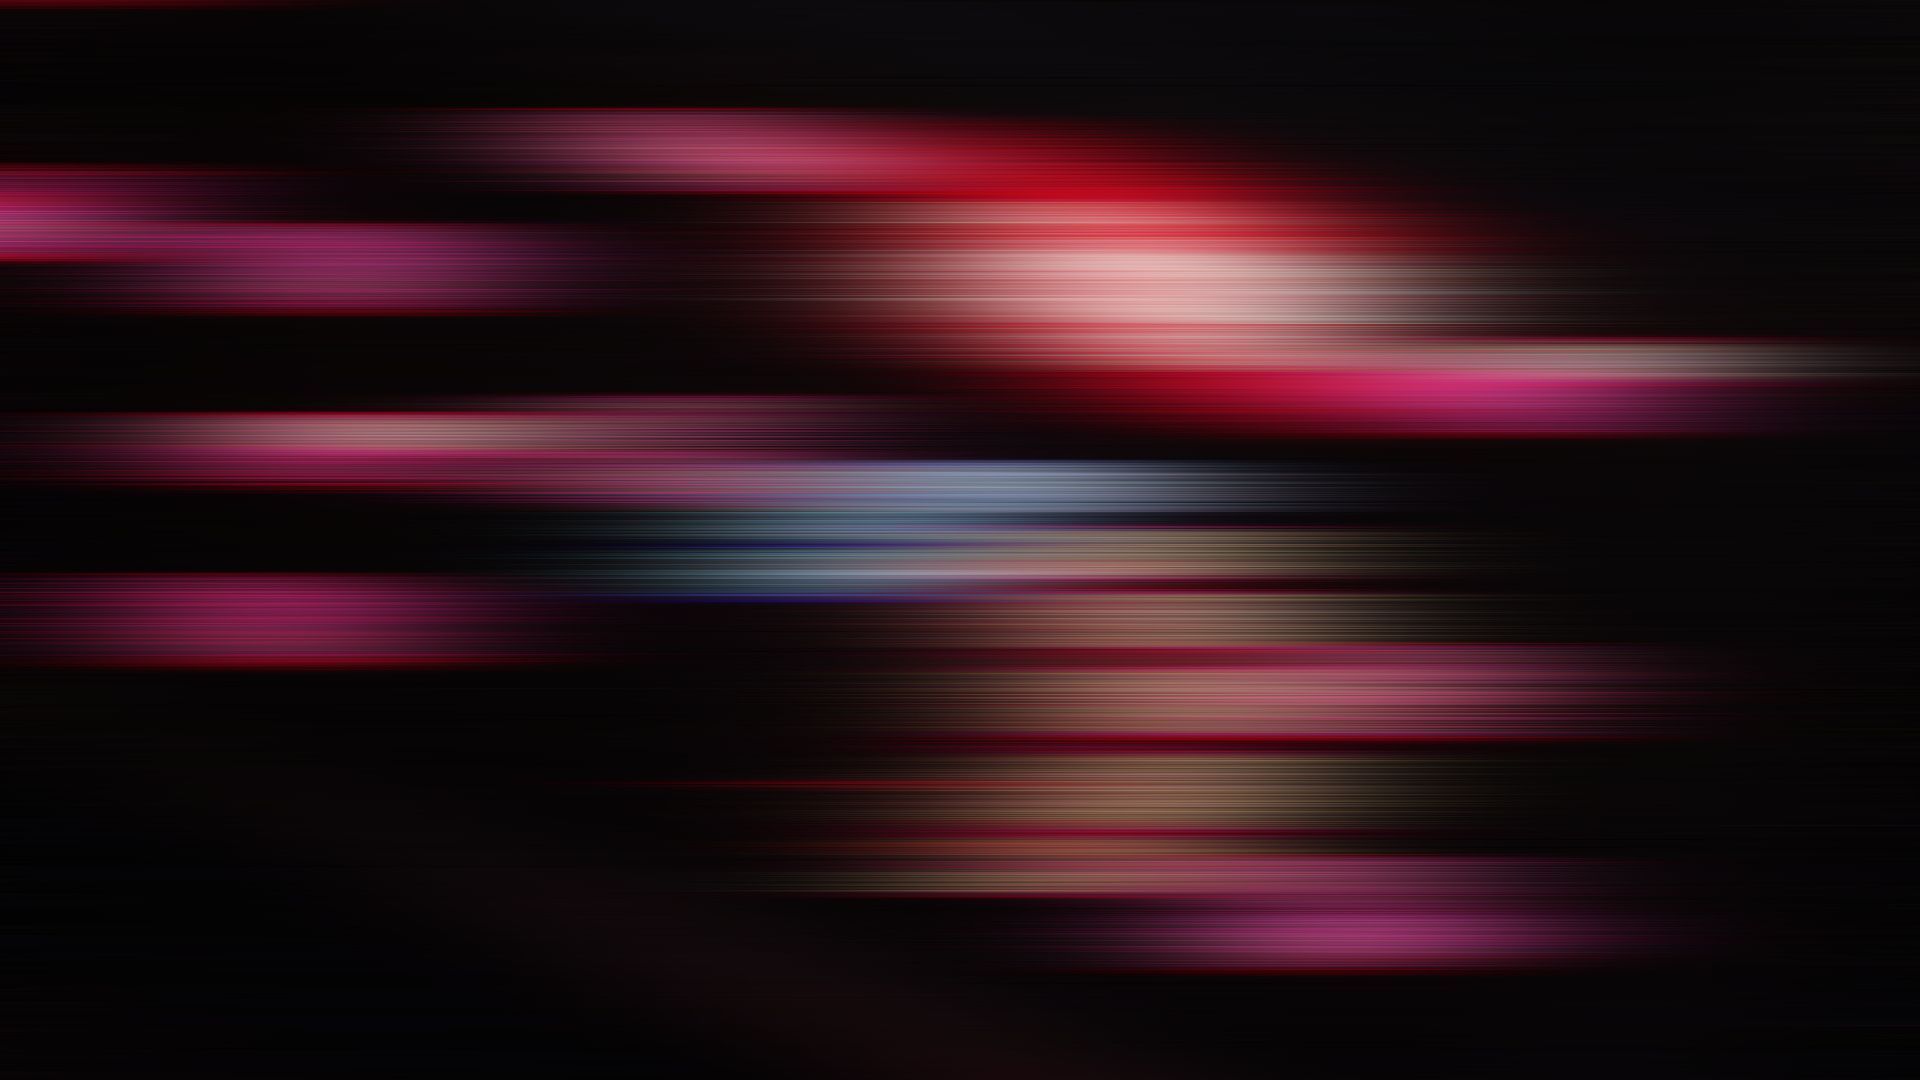 Red, purple and blue abstract lines on a black background - Blurry